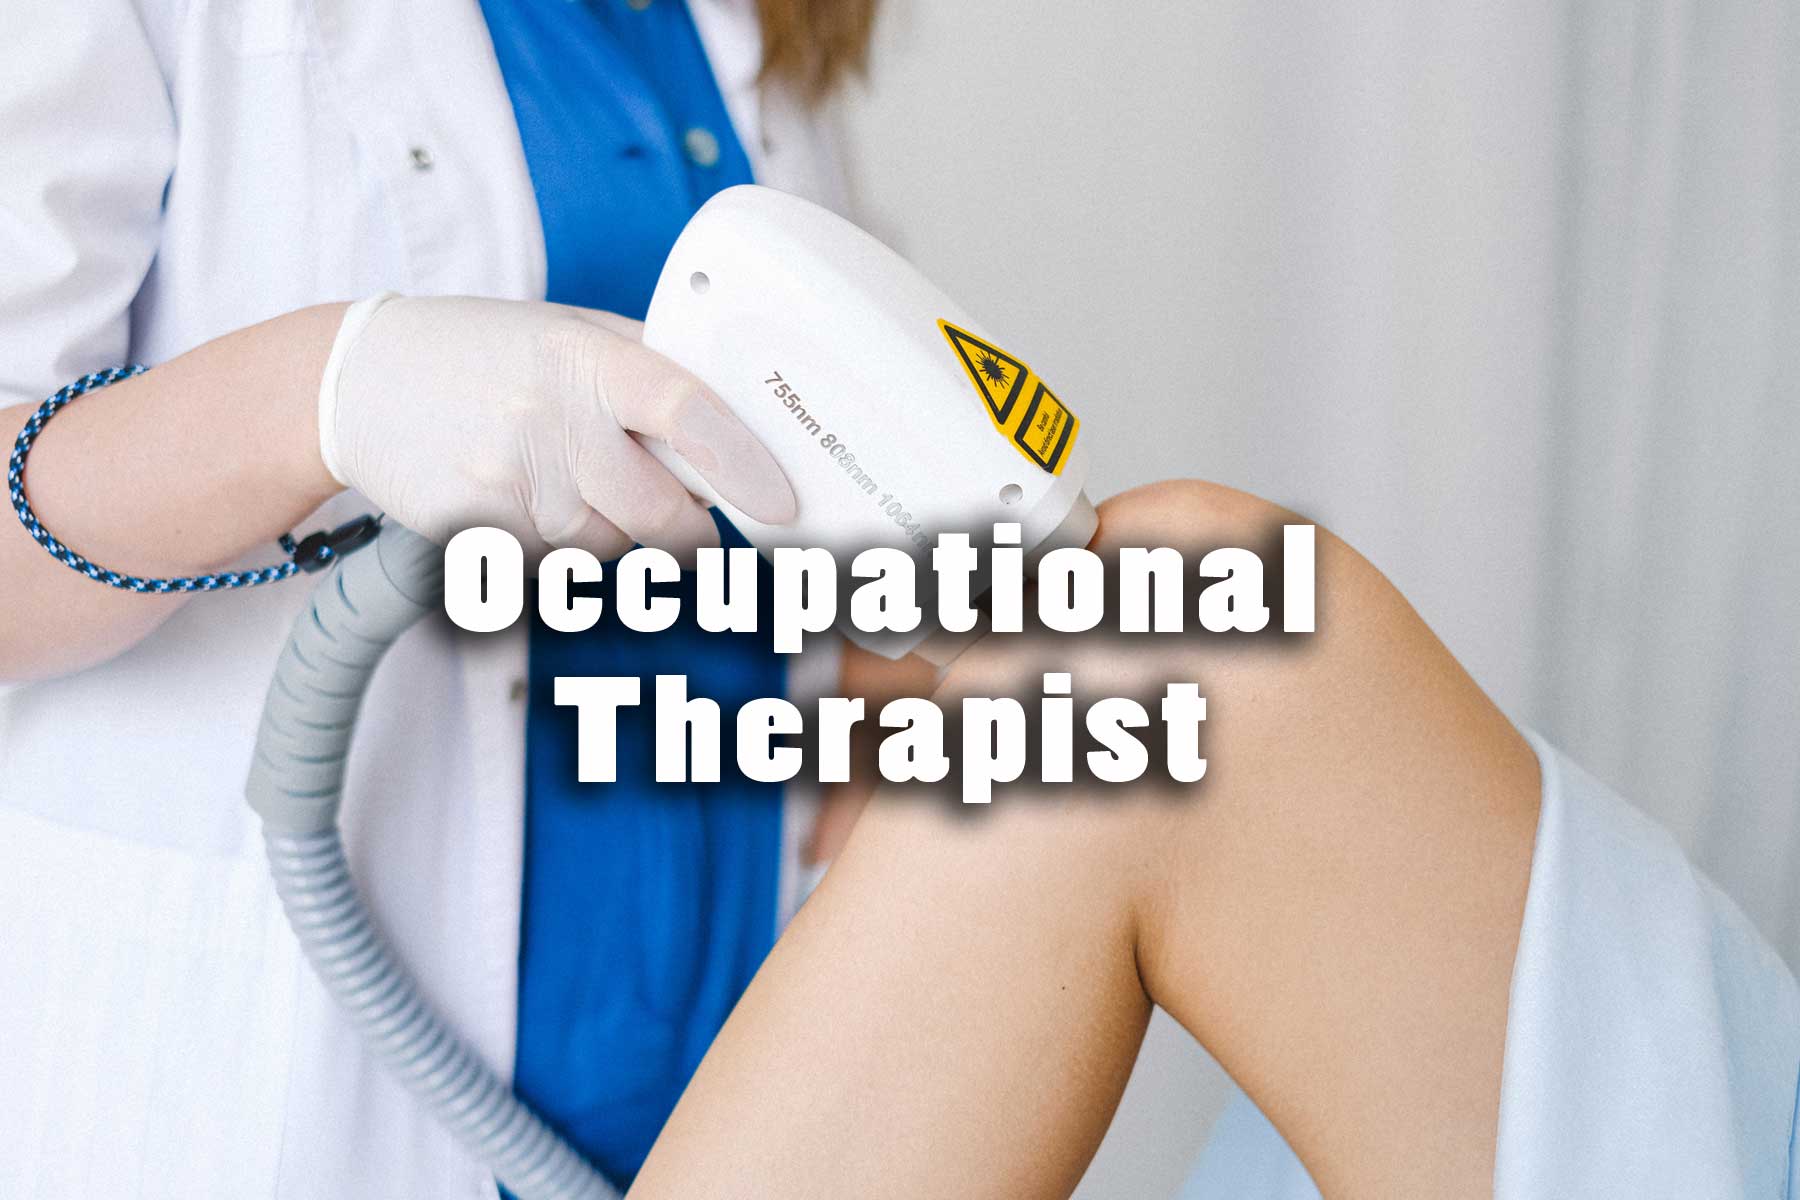 Occupational Therapist Questions and Answers